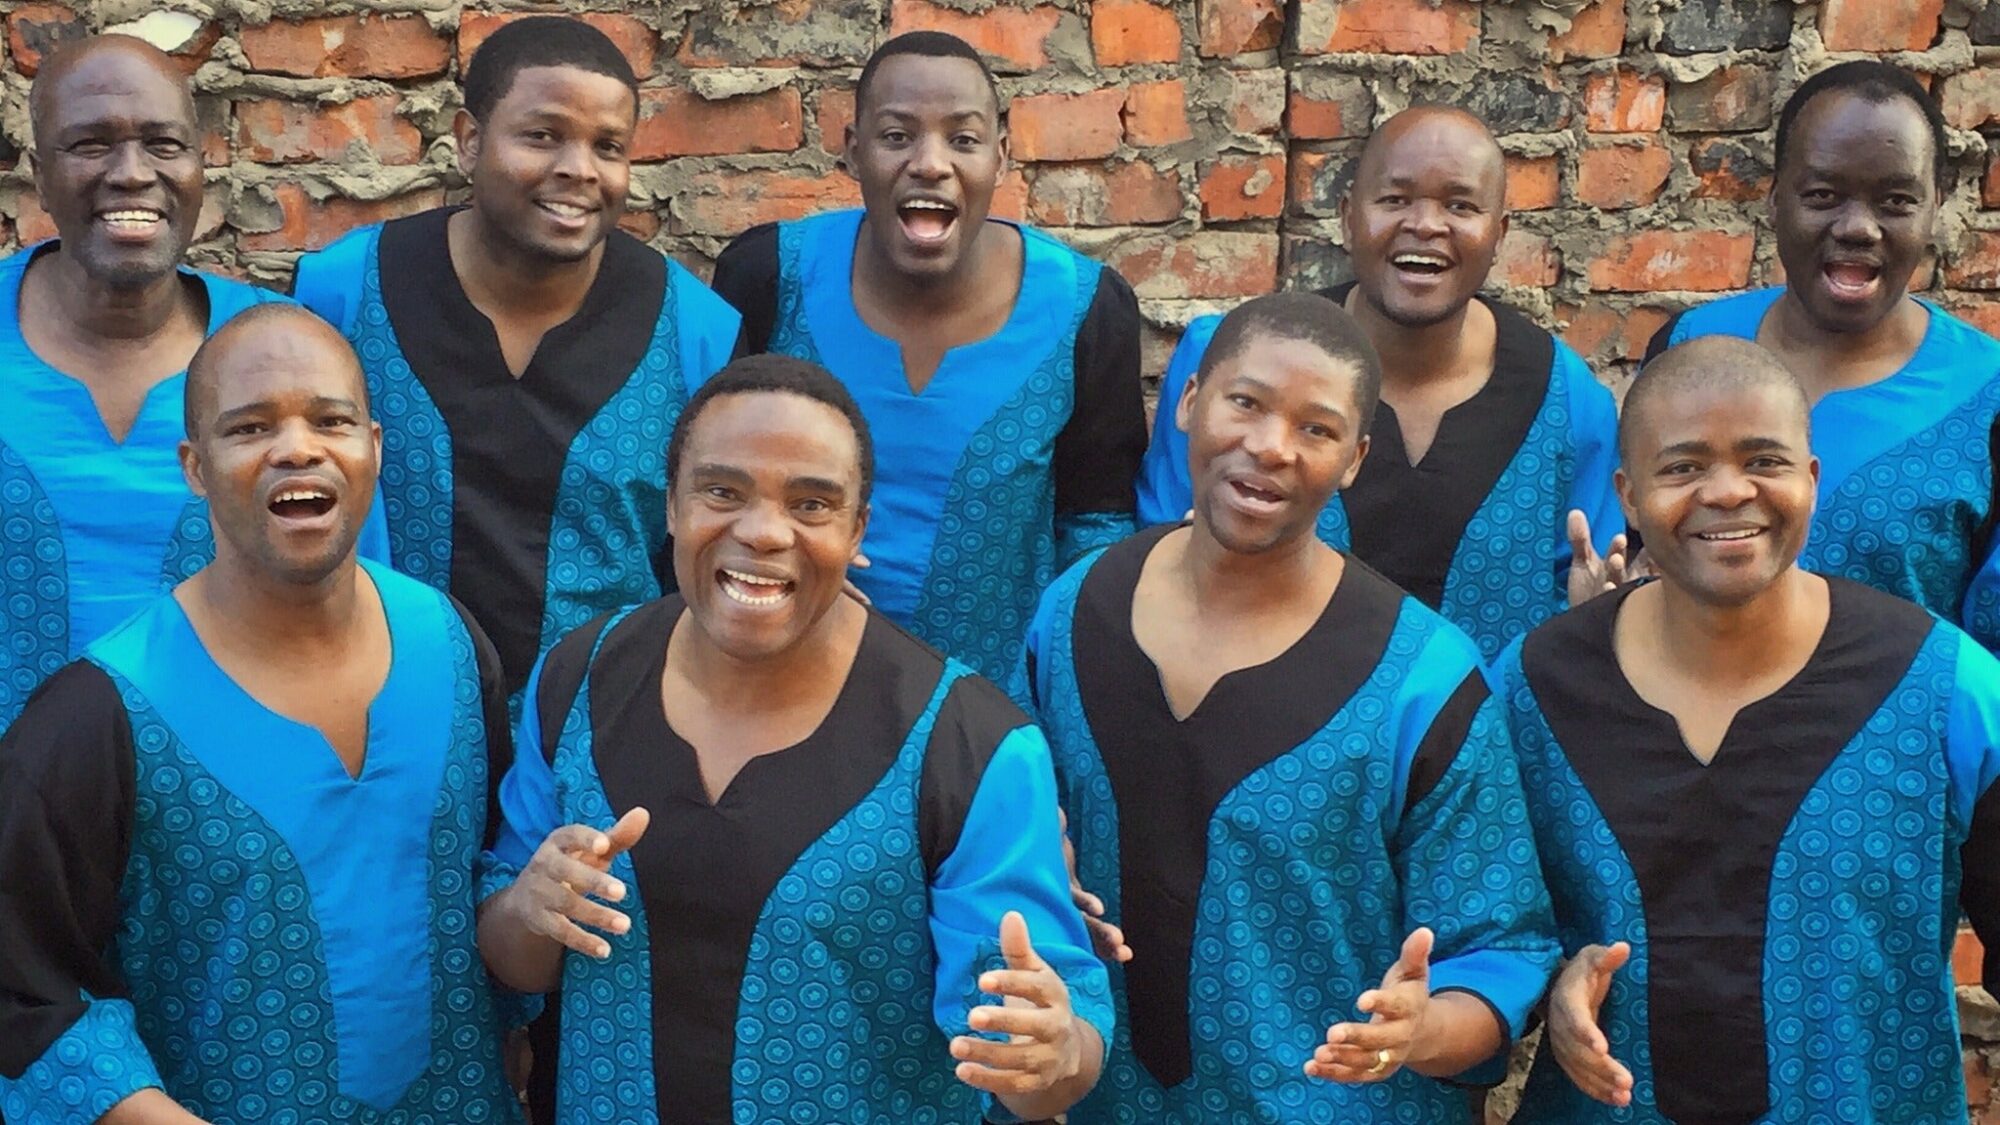 Image name Ladysmith Black Mambazo at Grand Opera House York York the 9 image from the post Events in Yorkshire.com.